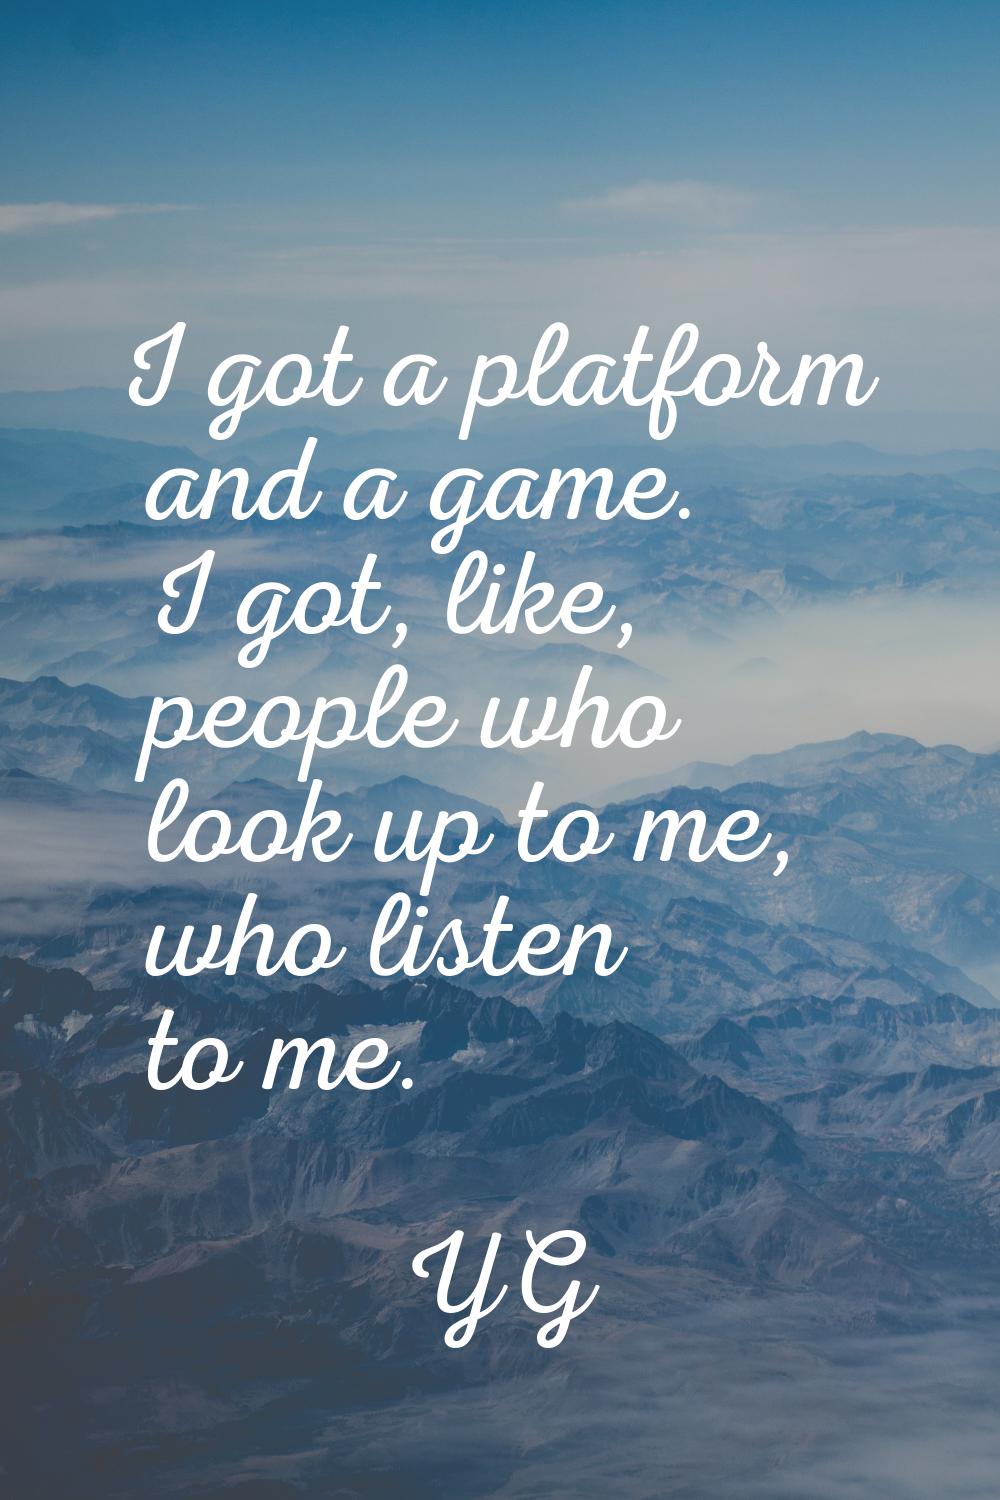 I got a platform and a game. I got, like, people who look up to me, who listen to me.